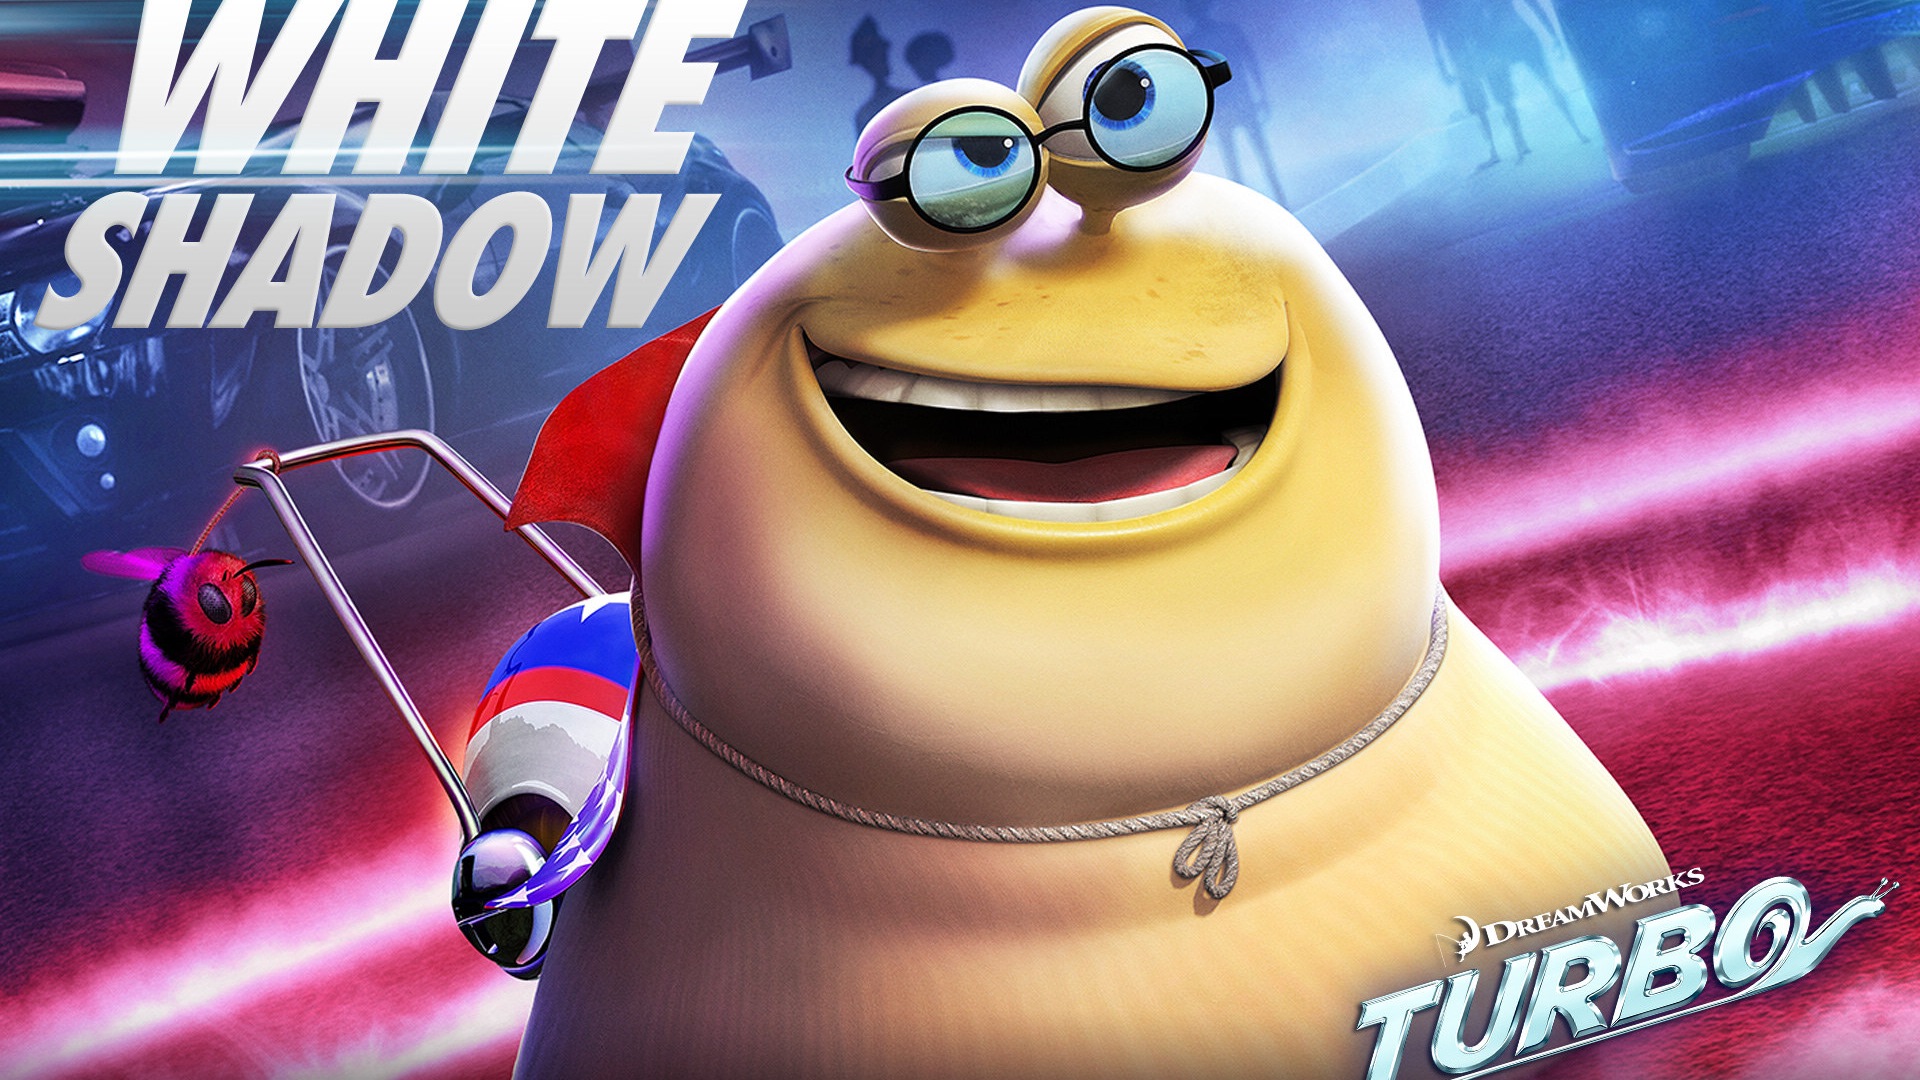 Turbo 3D movie HD wallpapers #8 - 1920x1080